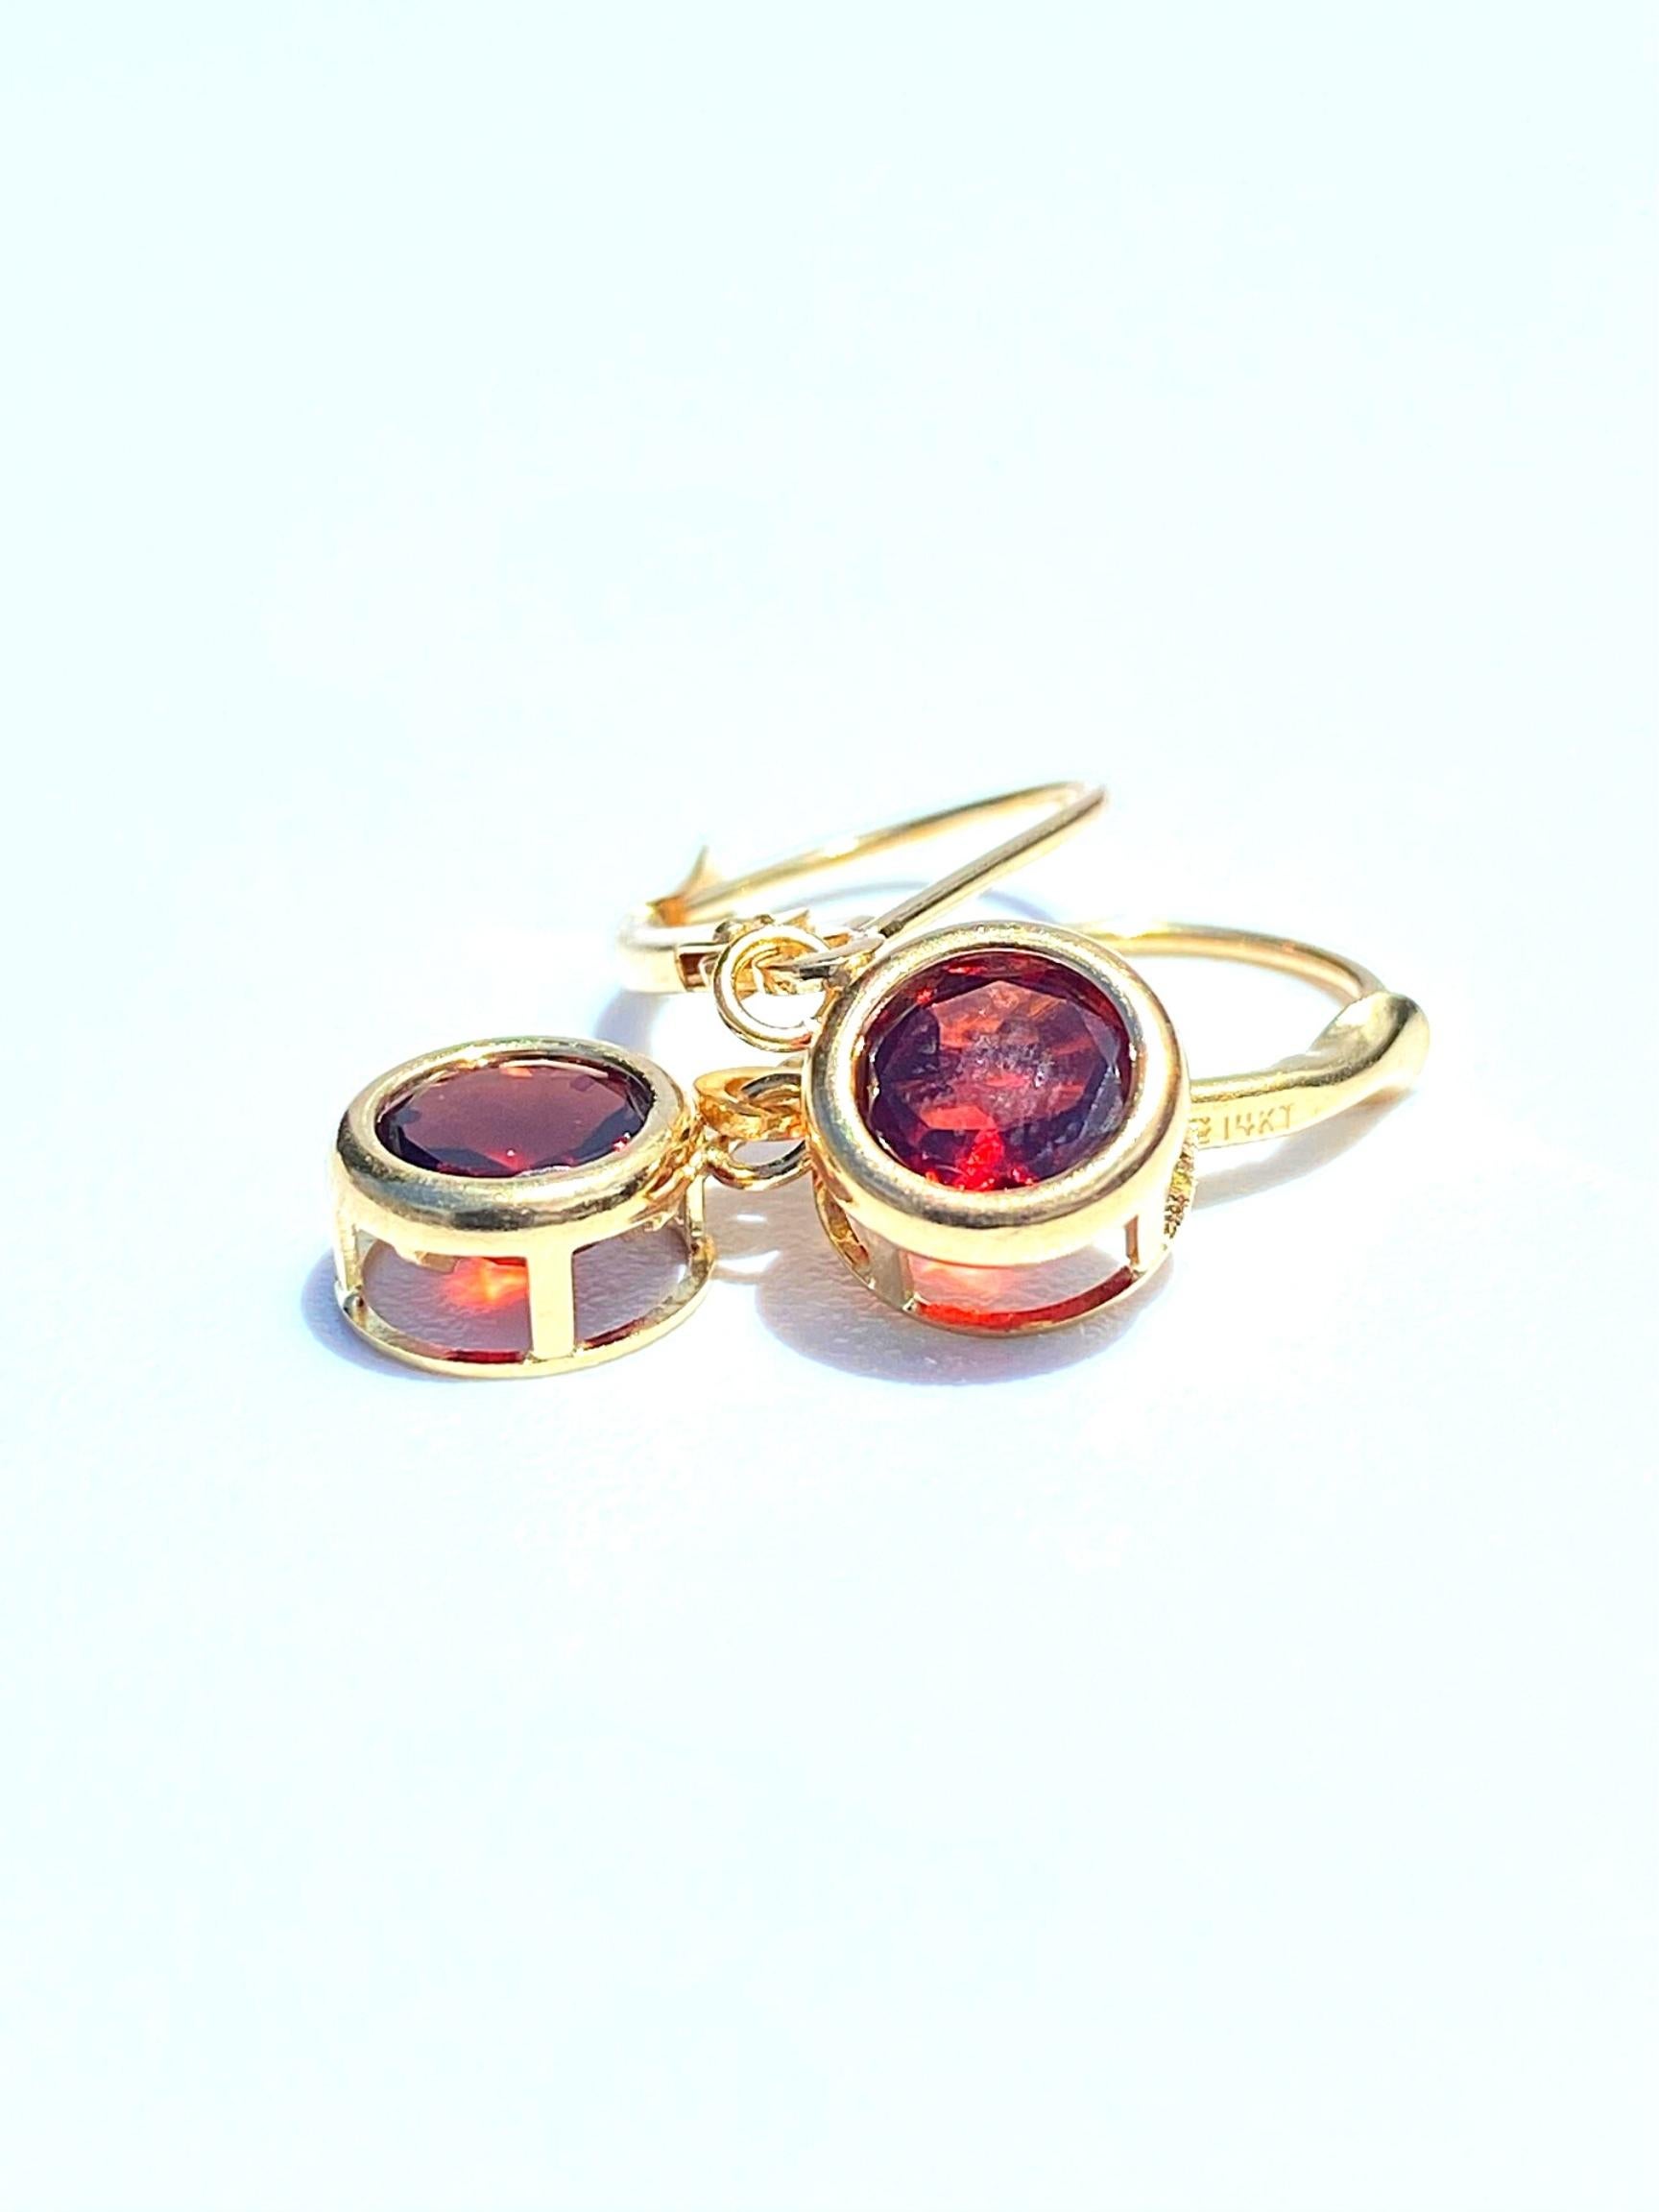 2.00 Carat Round-Brilliant Cut Red Garnet and 14K Yellow Gold Earrings In Excellent Condition For Sale In Miami, FL